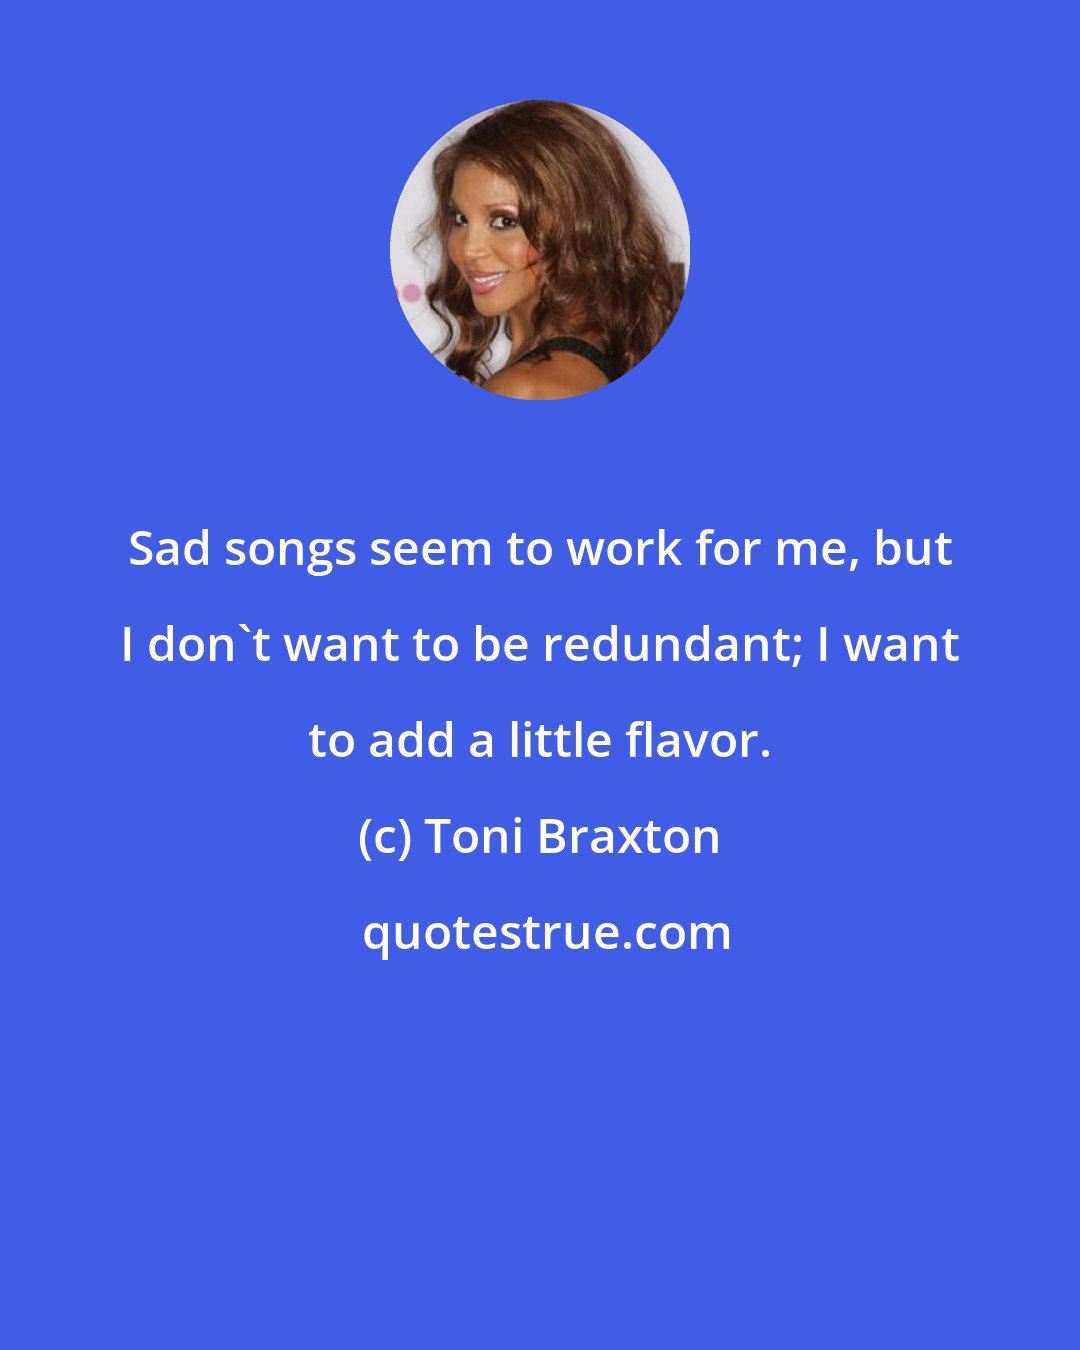 Toni Braxton: Sad songs seem to work for me, but I don't want to be redundant; I want to add a little flavor.